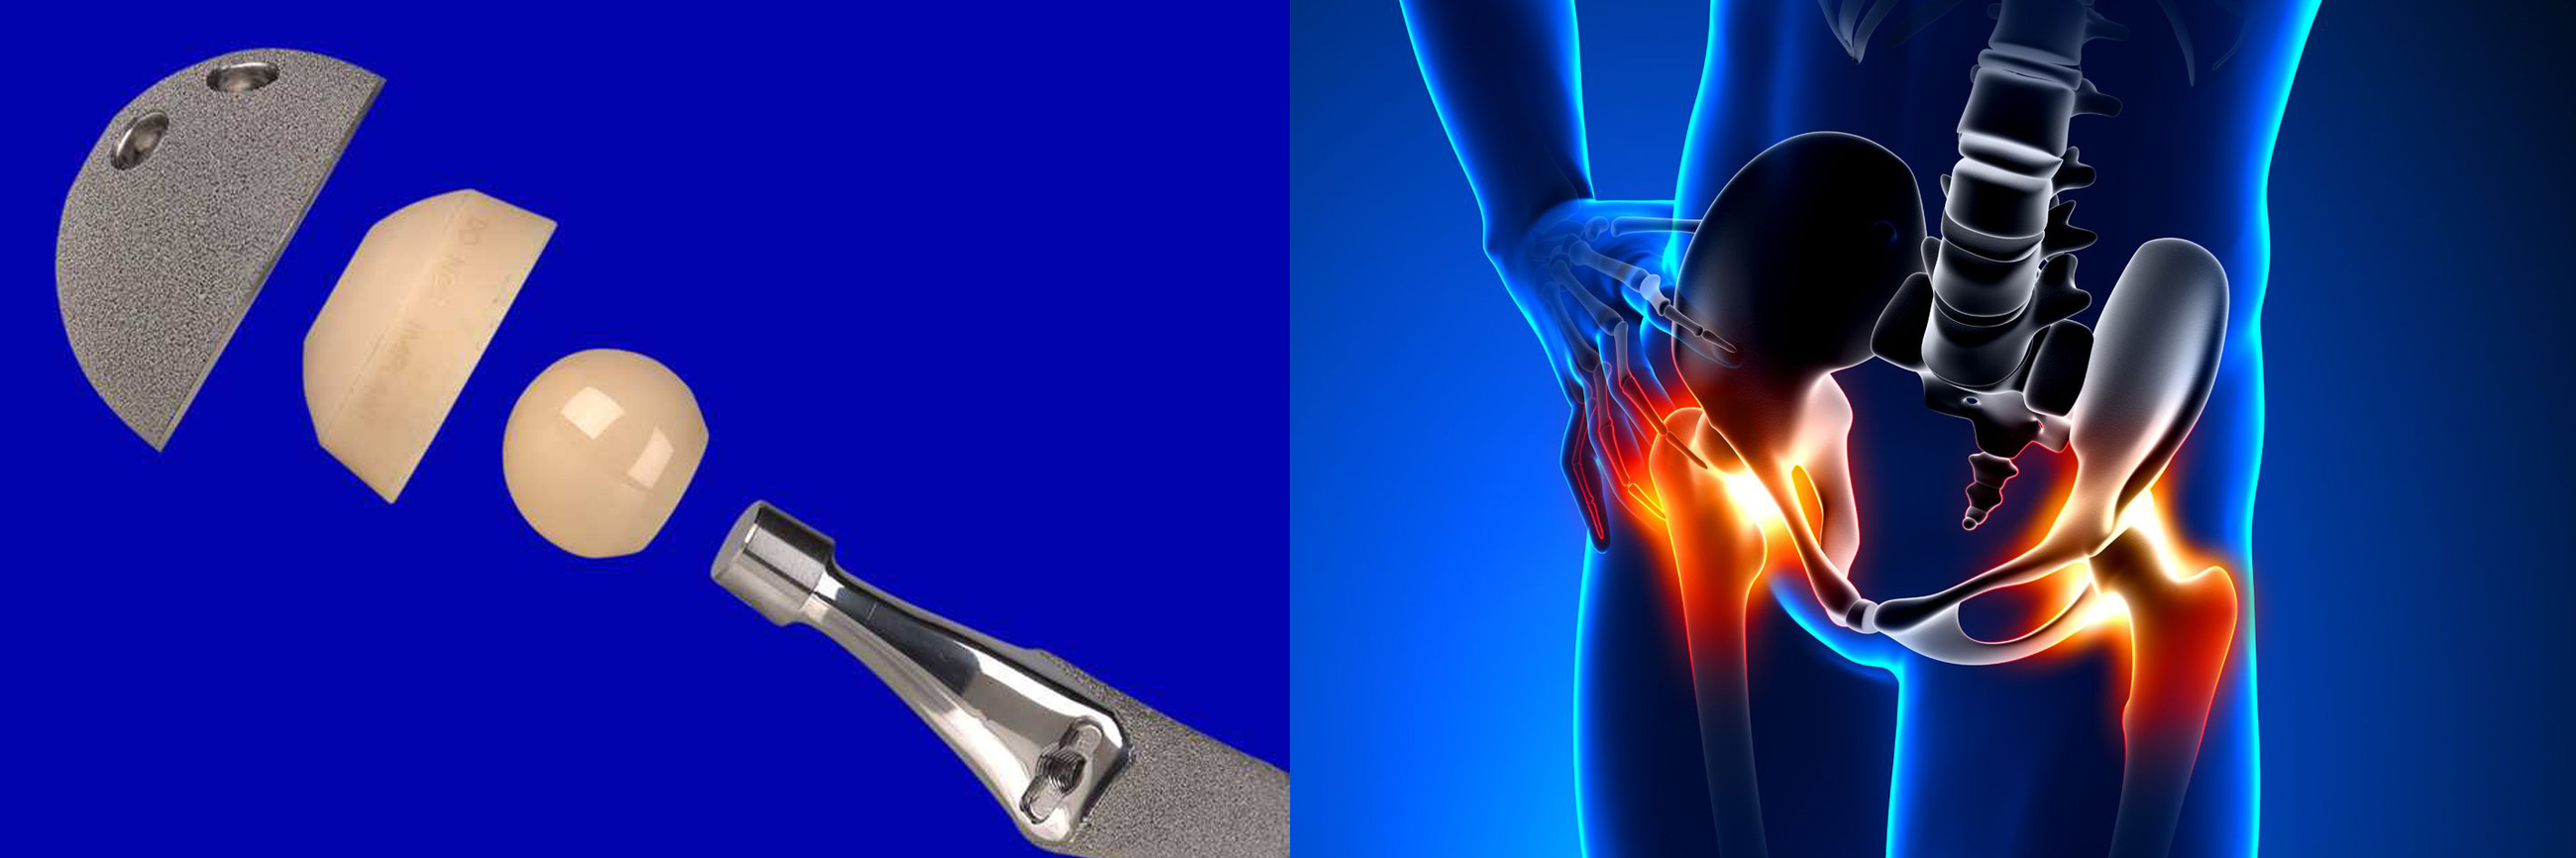 Abduction Wedge Hip Replacement thumbnail